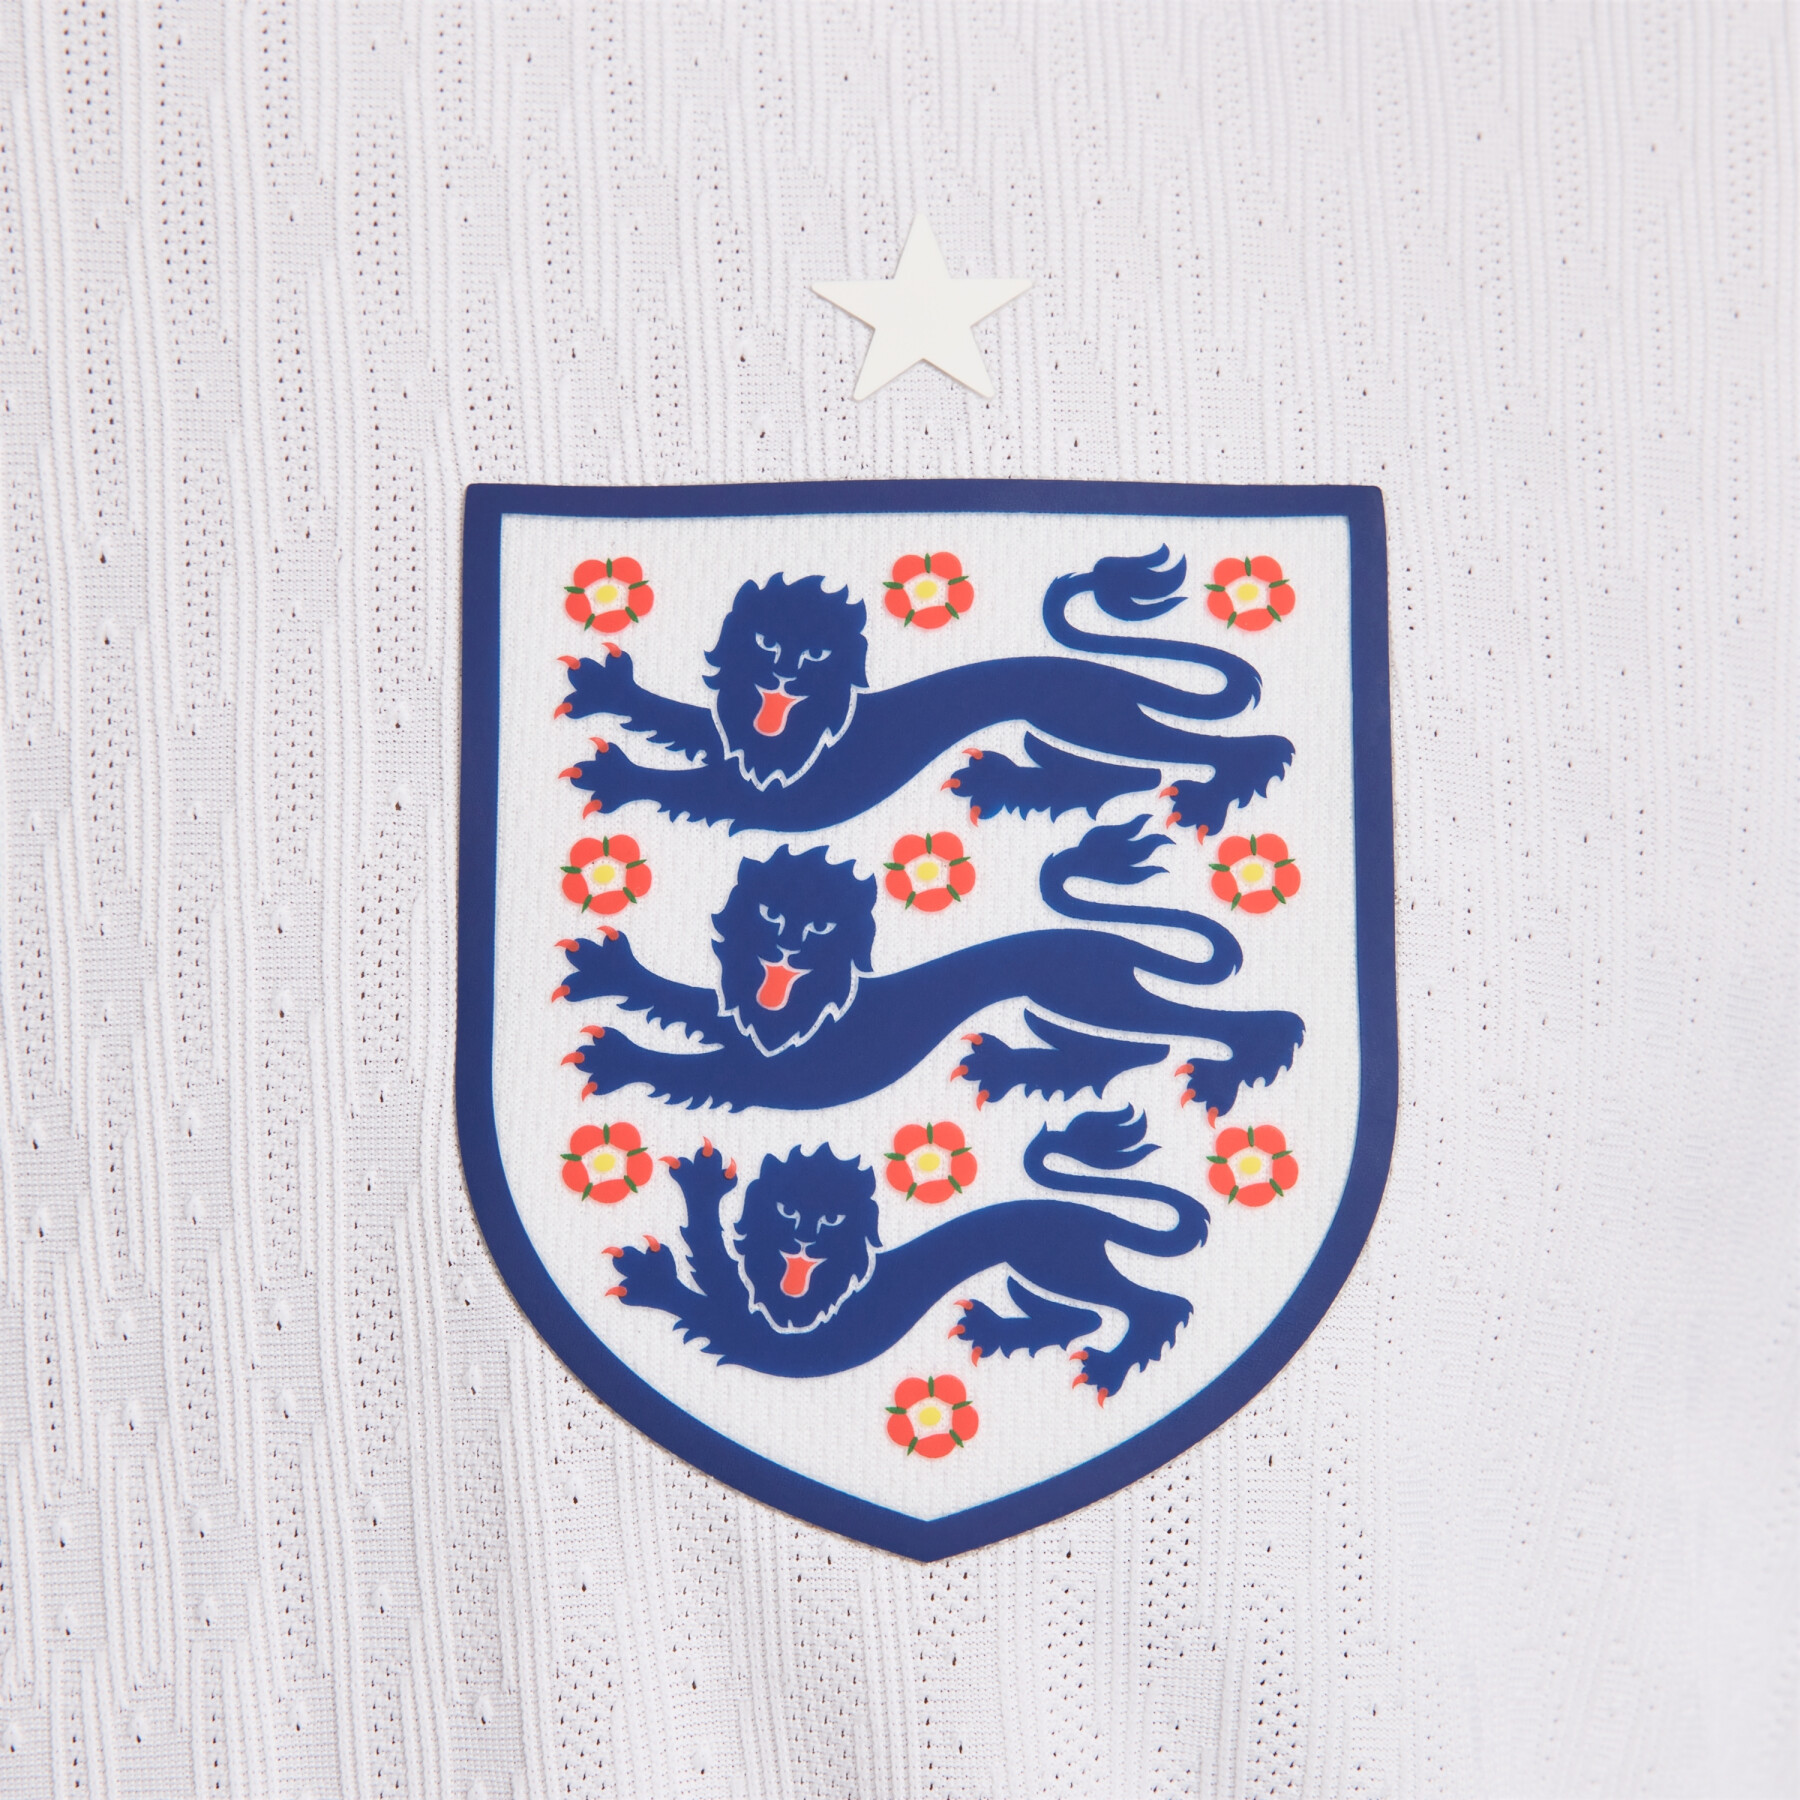 Authentic home jersey Angleterre Euro 2024